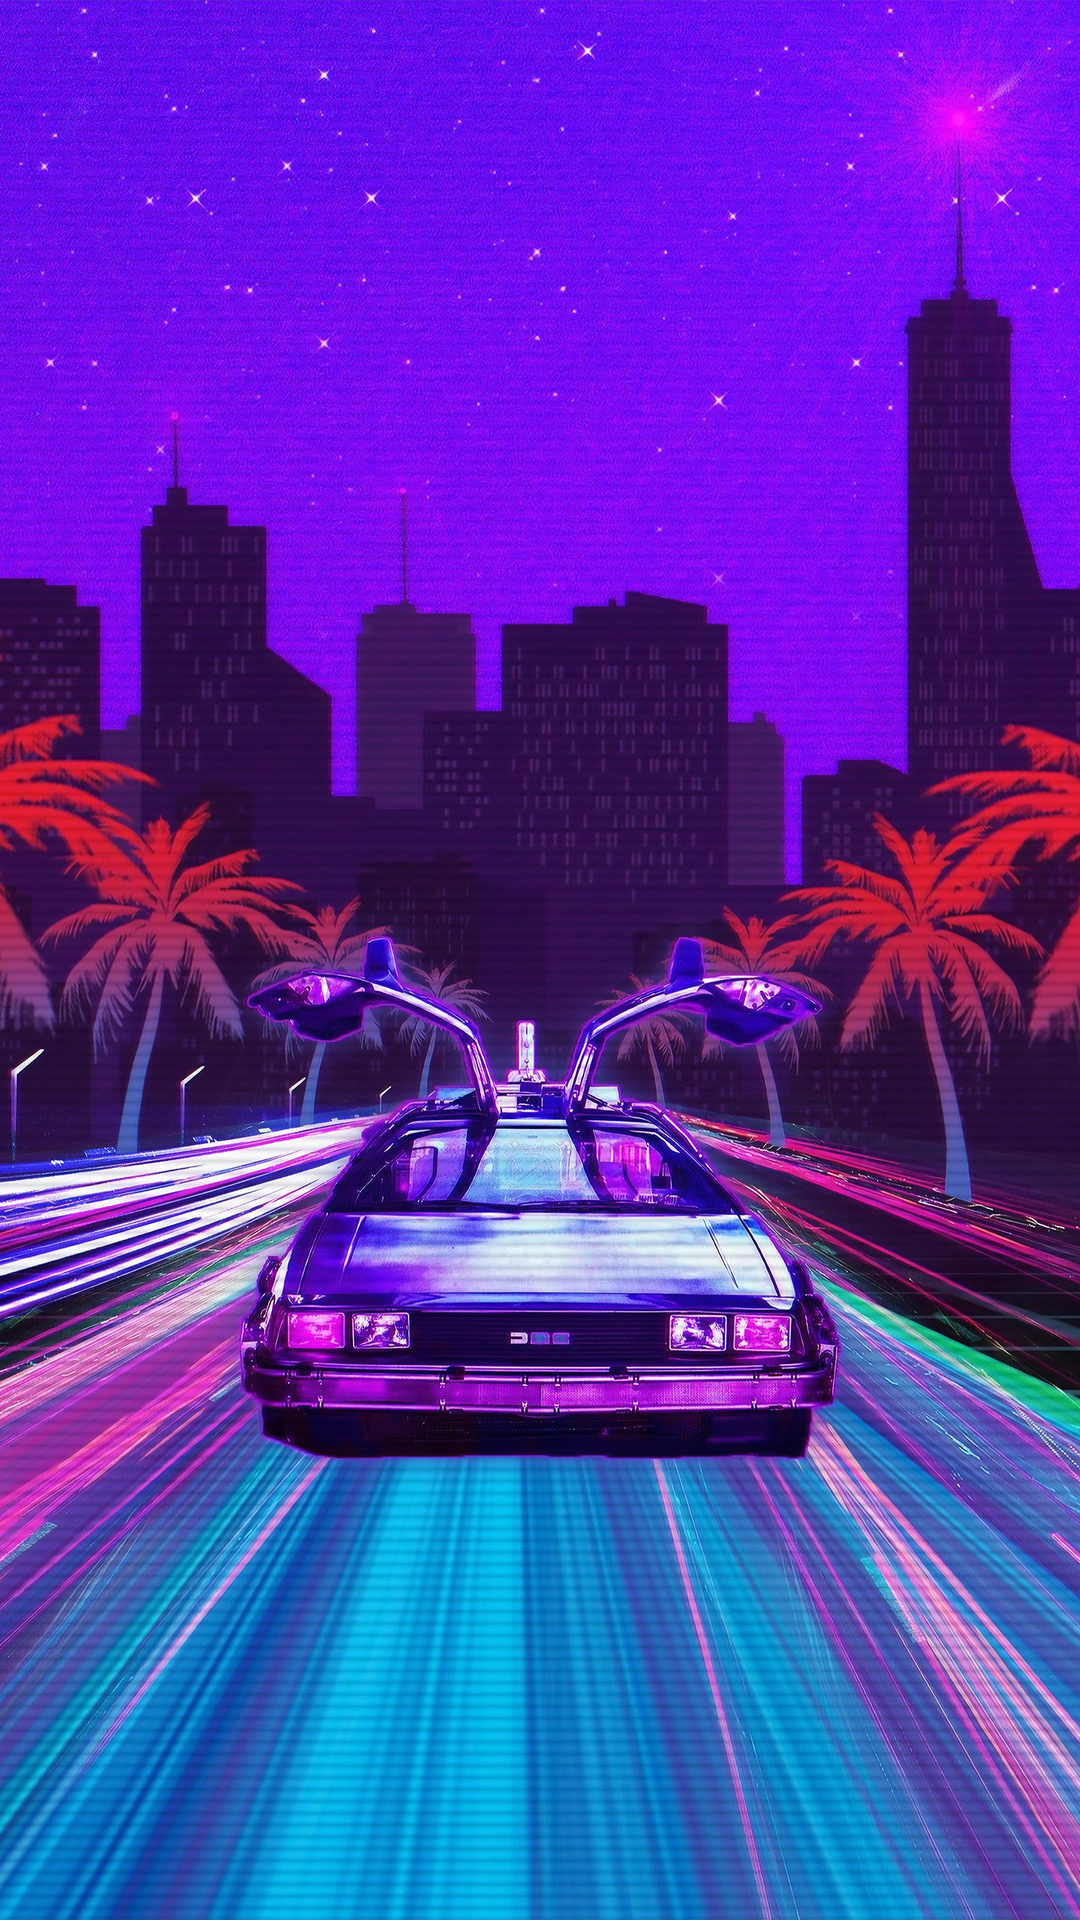 Featured image of post Vaporwave Wallpaper Iphone 8 Vaporwave wallpaper 1920px width 1080px height 2312 kb for your pc desktop background and mobile phone ipad iphone adroid